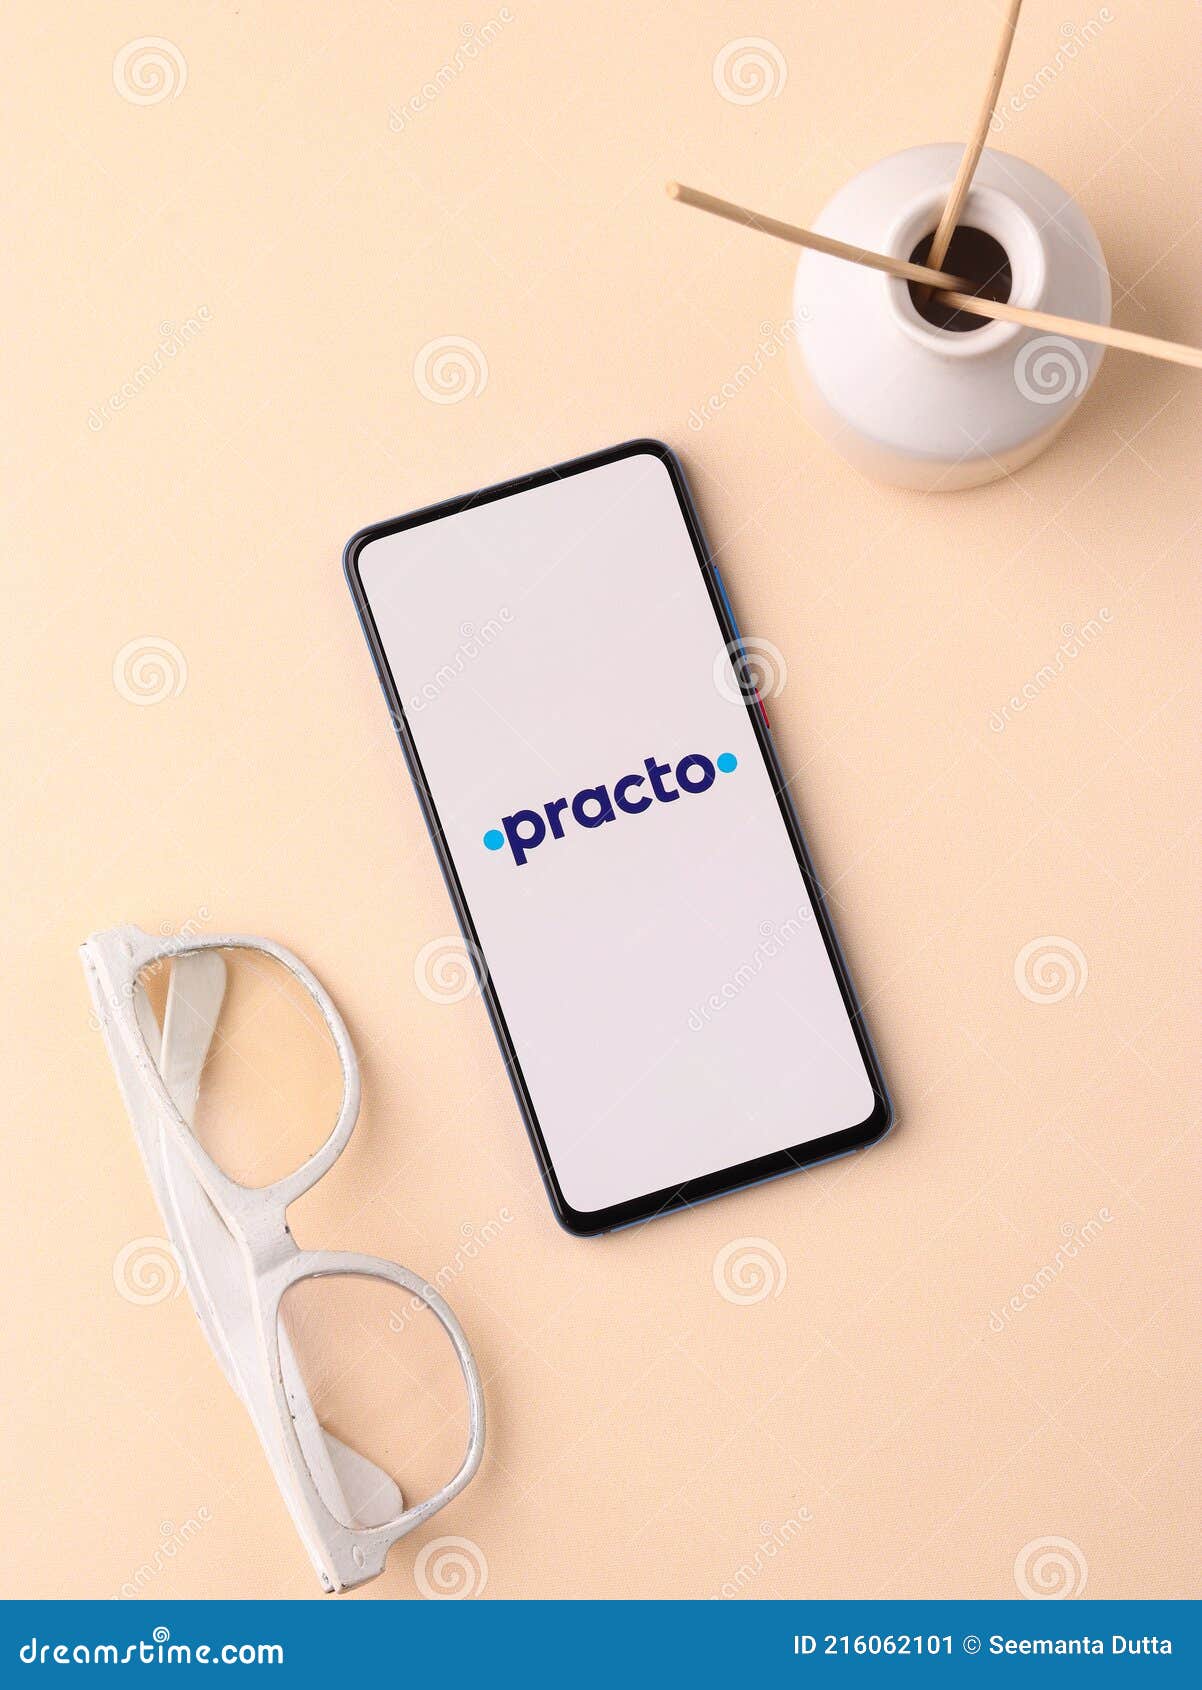 Practo Projects :: Photos, videos, logos, illustrations and branding ::  Behance